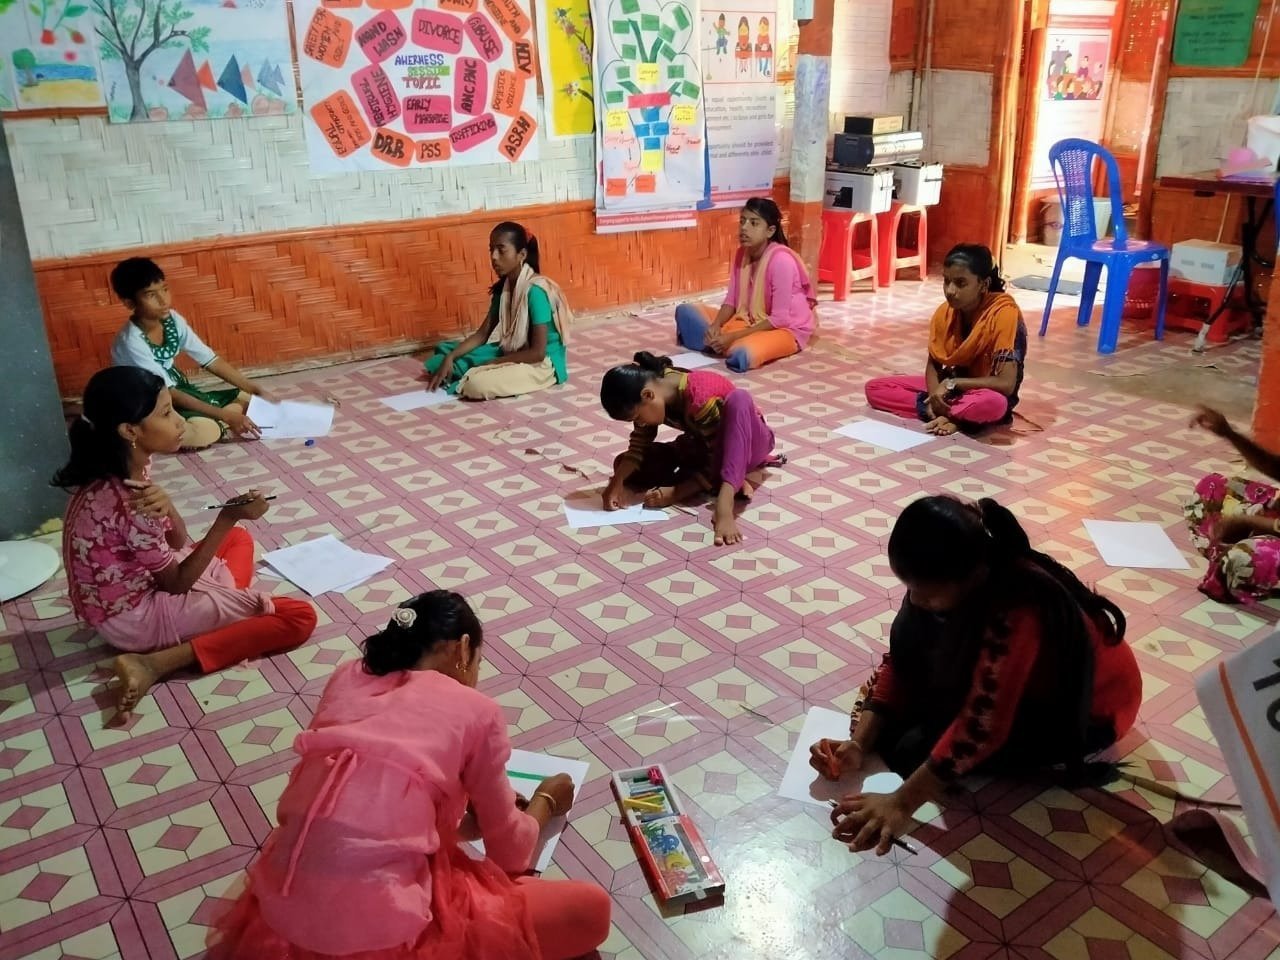 Girls participate in a drawing session at the Women and Girls' safe space in Cox’s Bazar refugee camp, Bangladesh